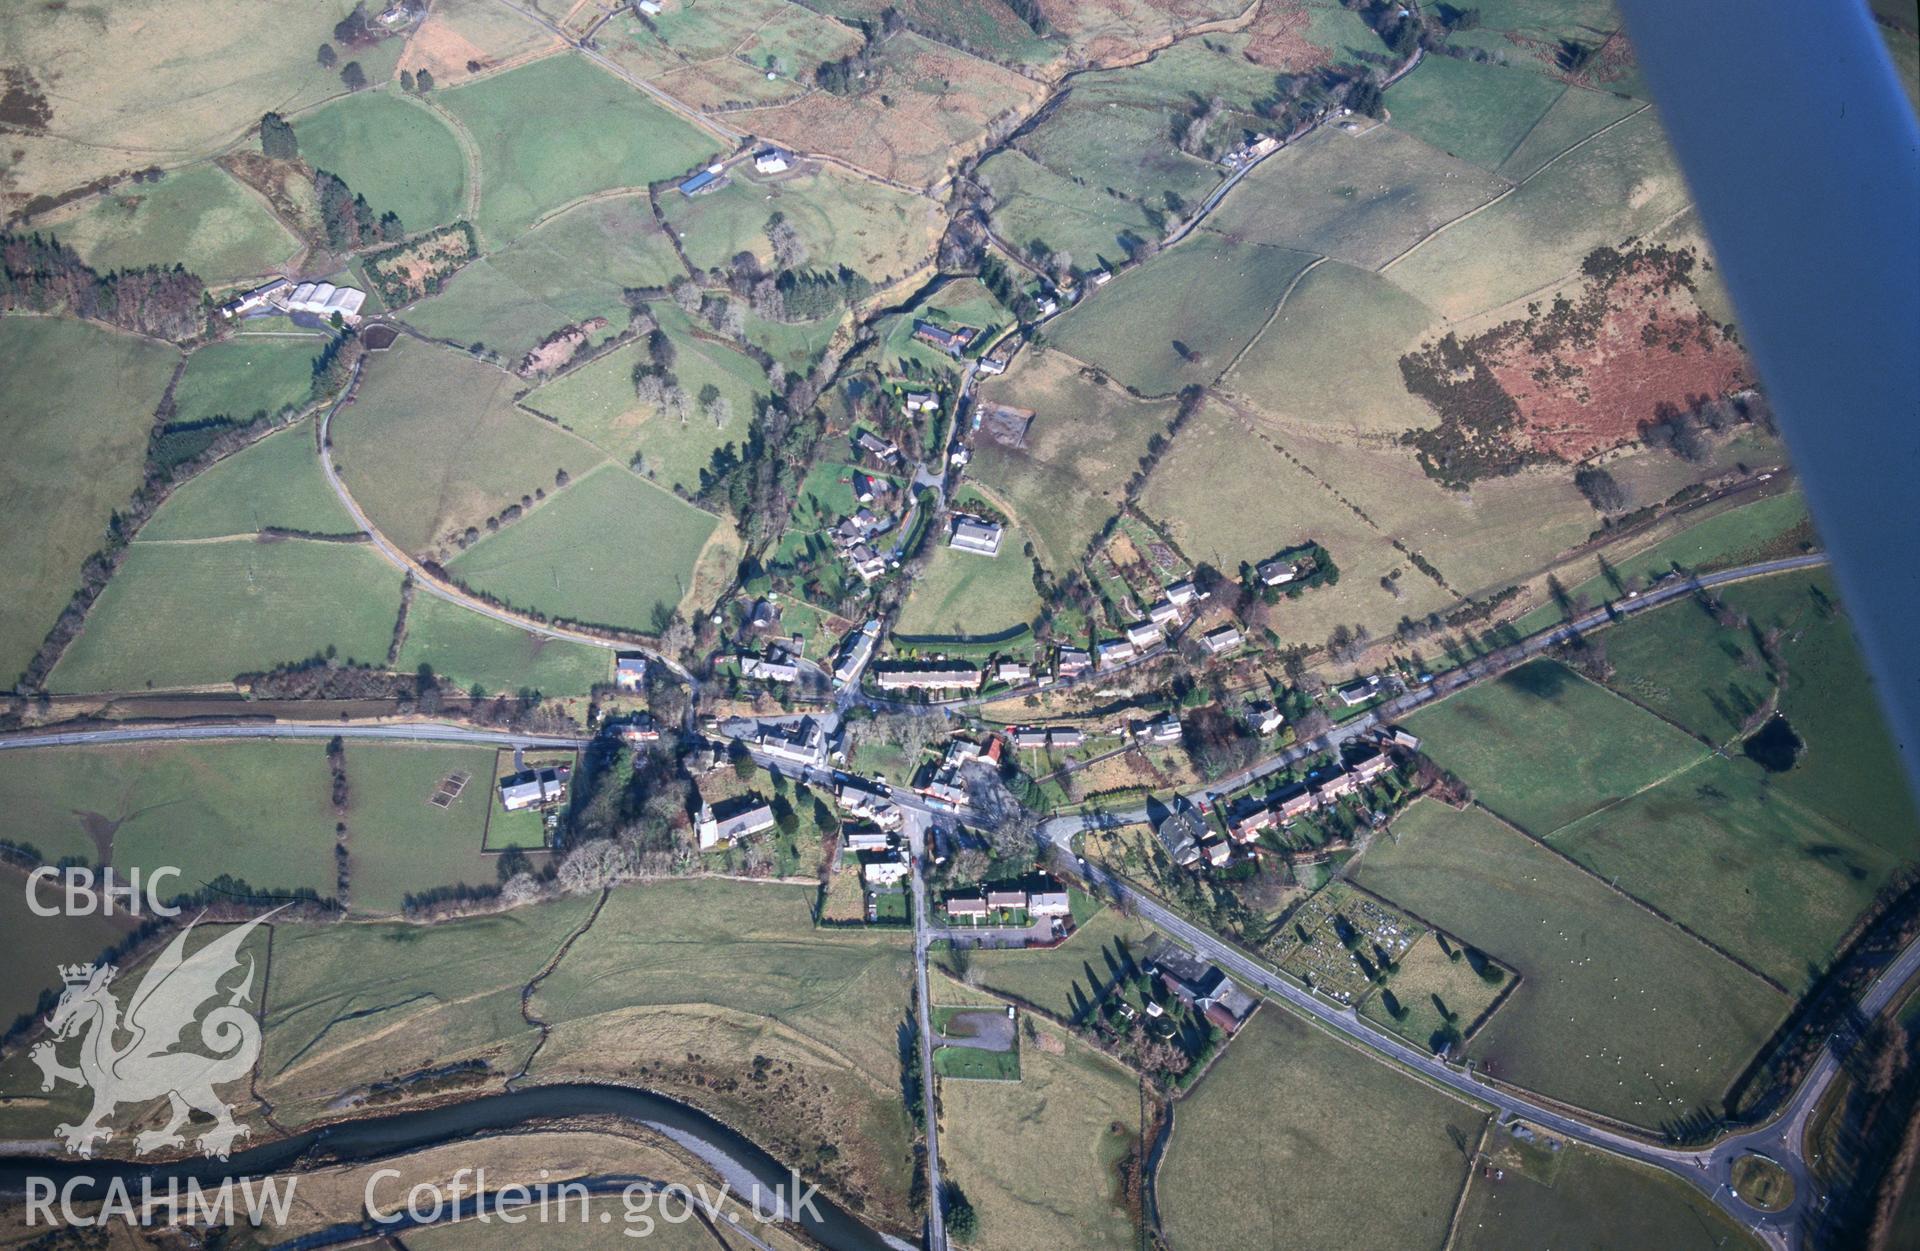 Slide of RCAHMW colour oblique aerial photograph of Llangurig, taken by T.G. Driver, 9/2/2001.